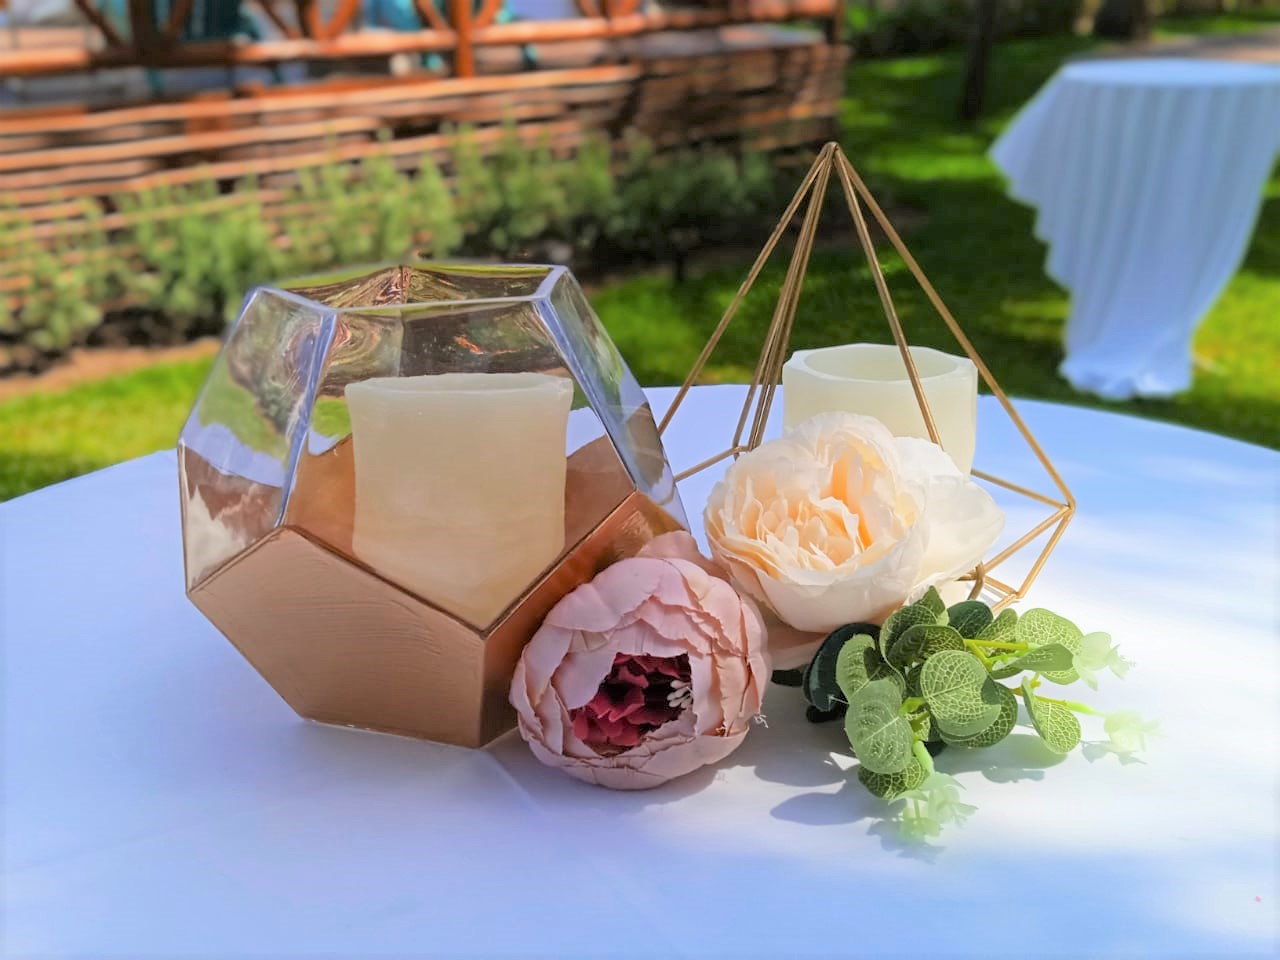 10cm GLASS MIRRORED CUBE VASE CLEAR 4" Square Clear Flower Table Wedding Event 